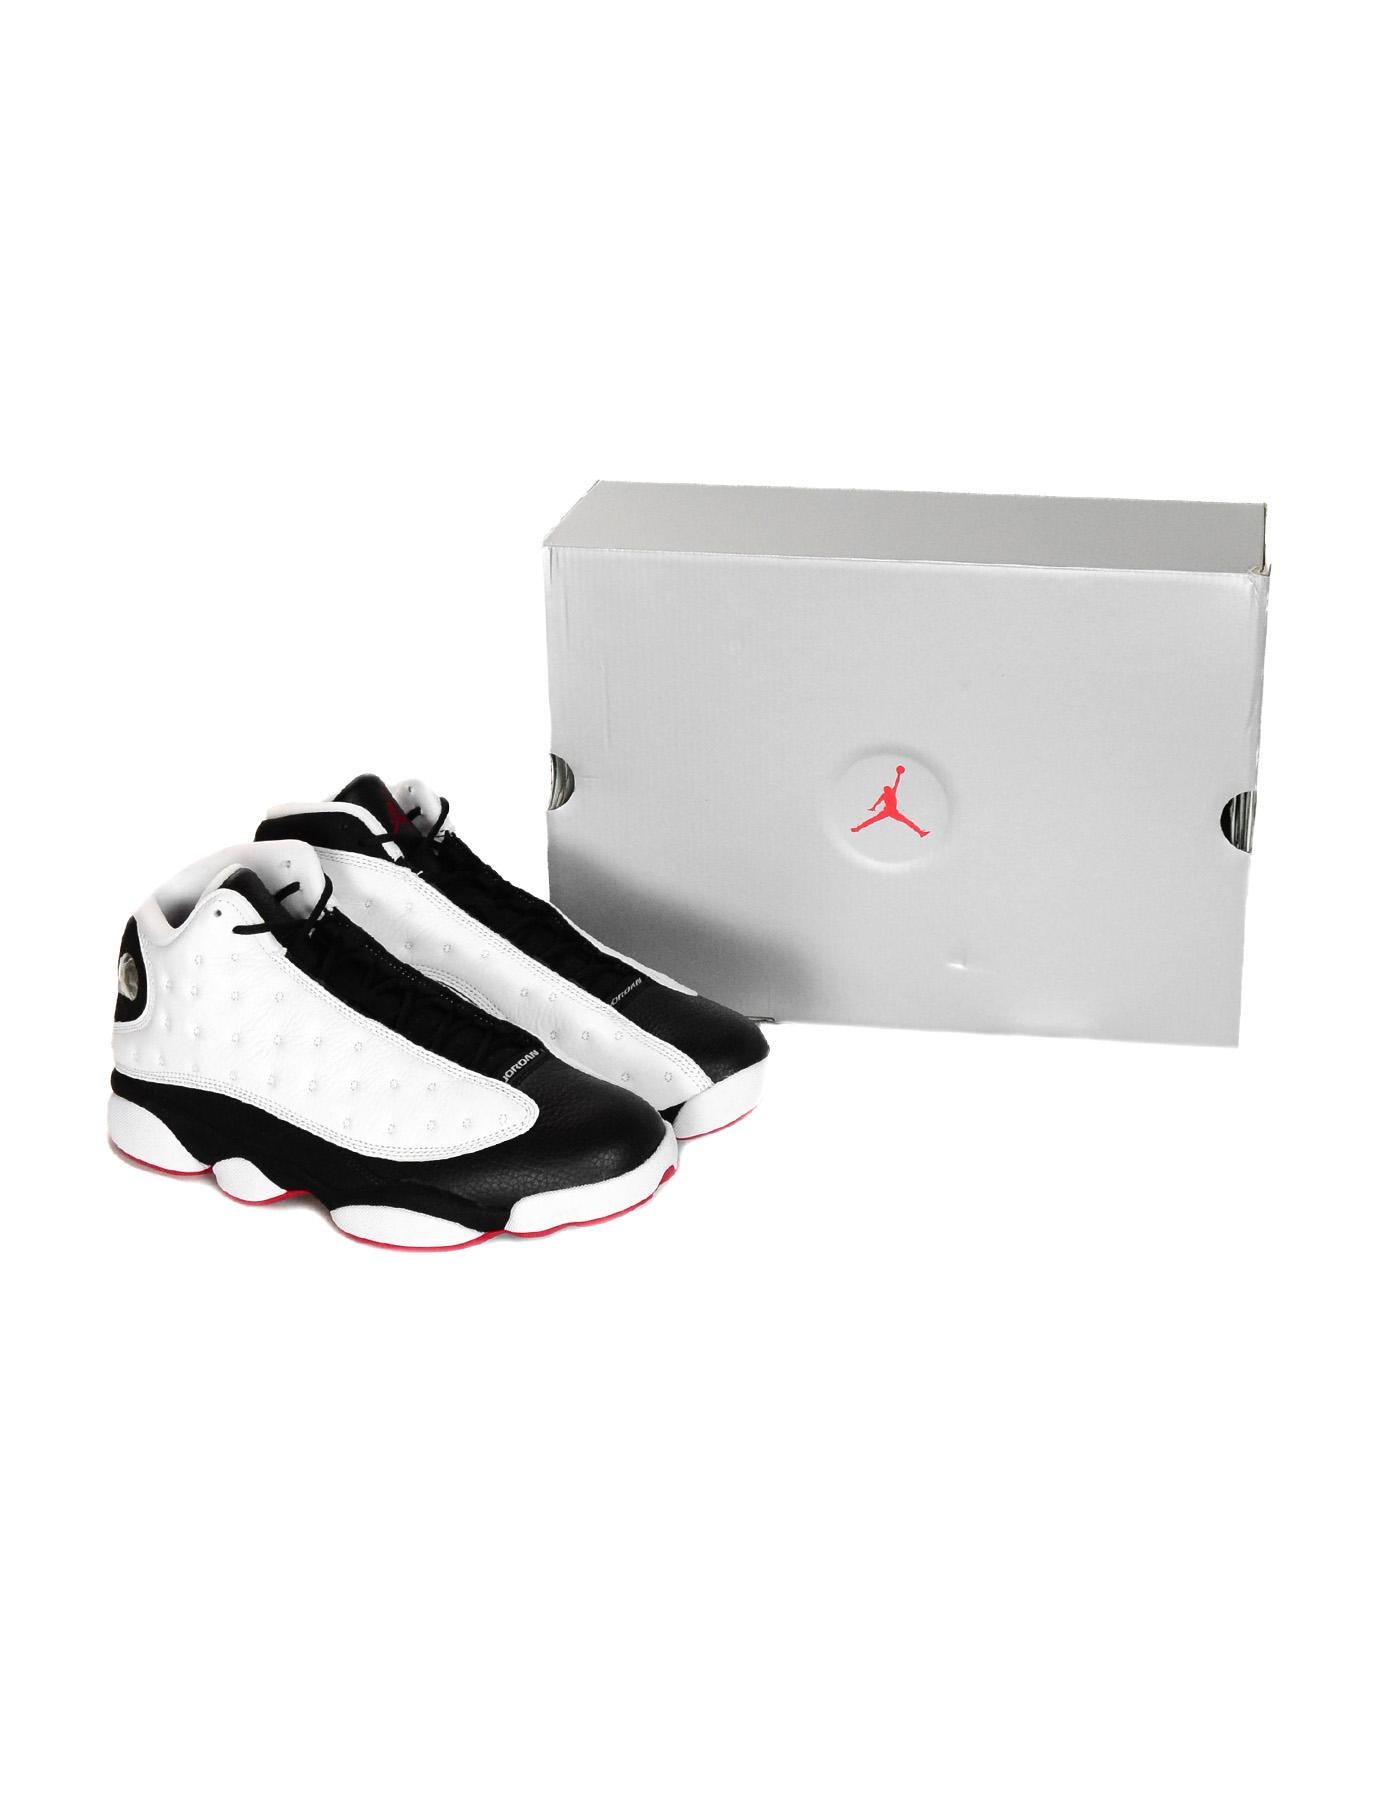 Nike Men's White/Black NEW Air Jordan 13 Retro Sneakers Sz 9.5 W/ Box

Made In: China
Color: White/black
Materials: Leather and rubber
Closure/Opening:  Lace up front
Overall Condition: Like new condition in original box
Includes: Air Jordan